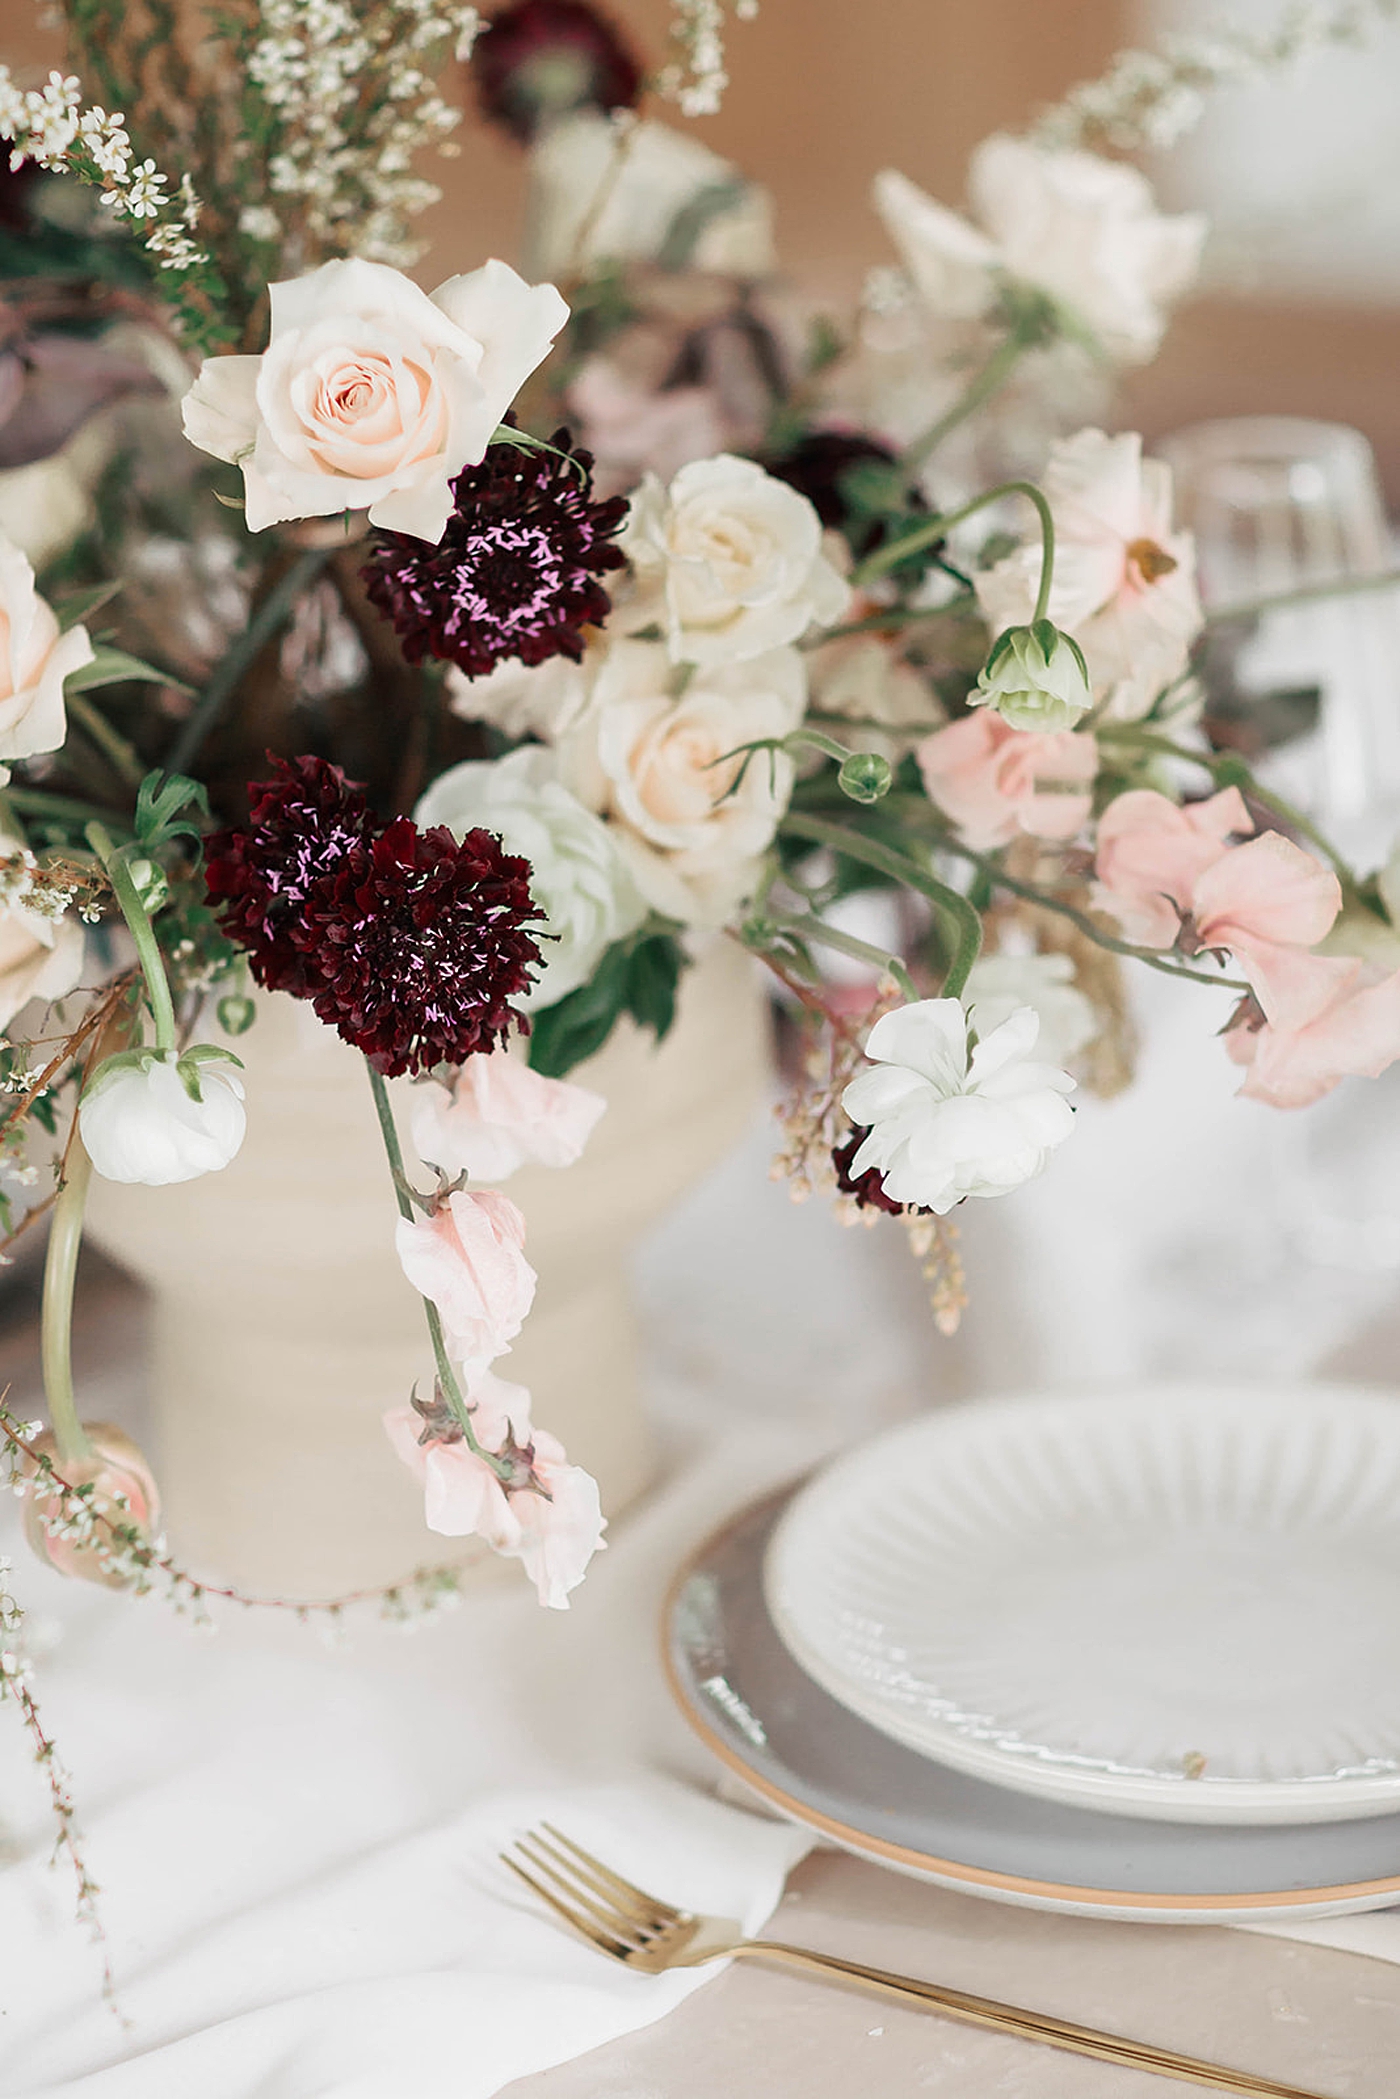 Assortment of wedding flowers on a table | Romantic French Countryside Editorial by Carters Event Co